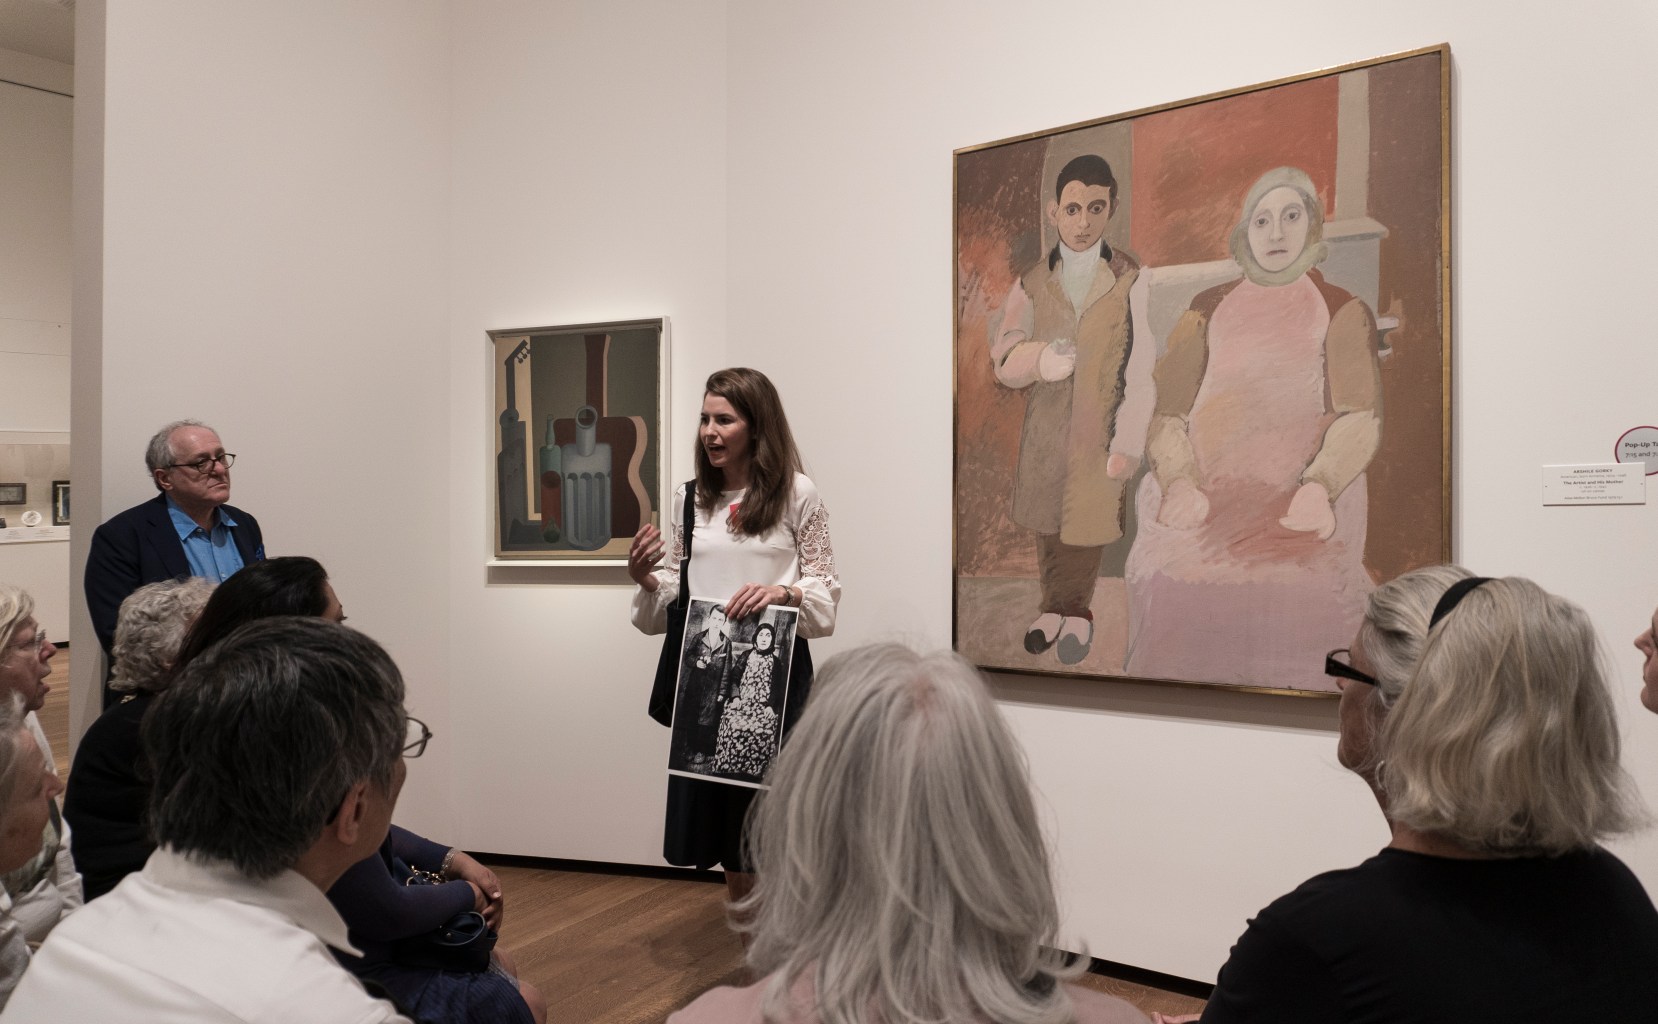 An educator stands in front of a painting addressing a seated group of participants. The painting behind her shows a standing child and a seated adult, and is rendered in flat blocks of earth-toned color. The educator holds up a print-out of a photograph of the subjects in real life.